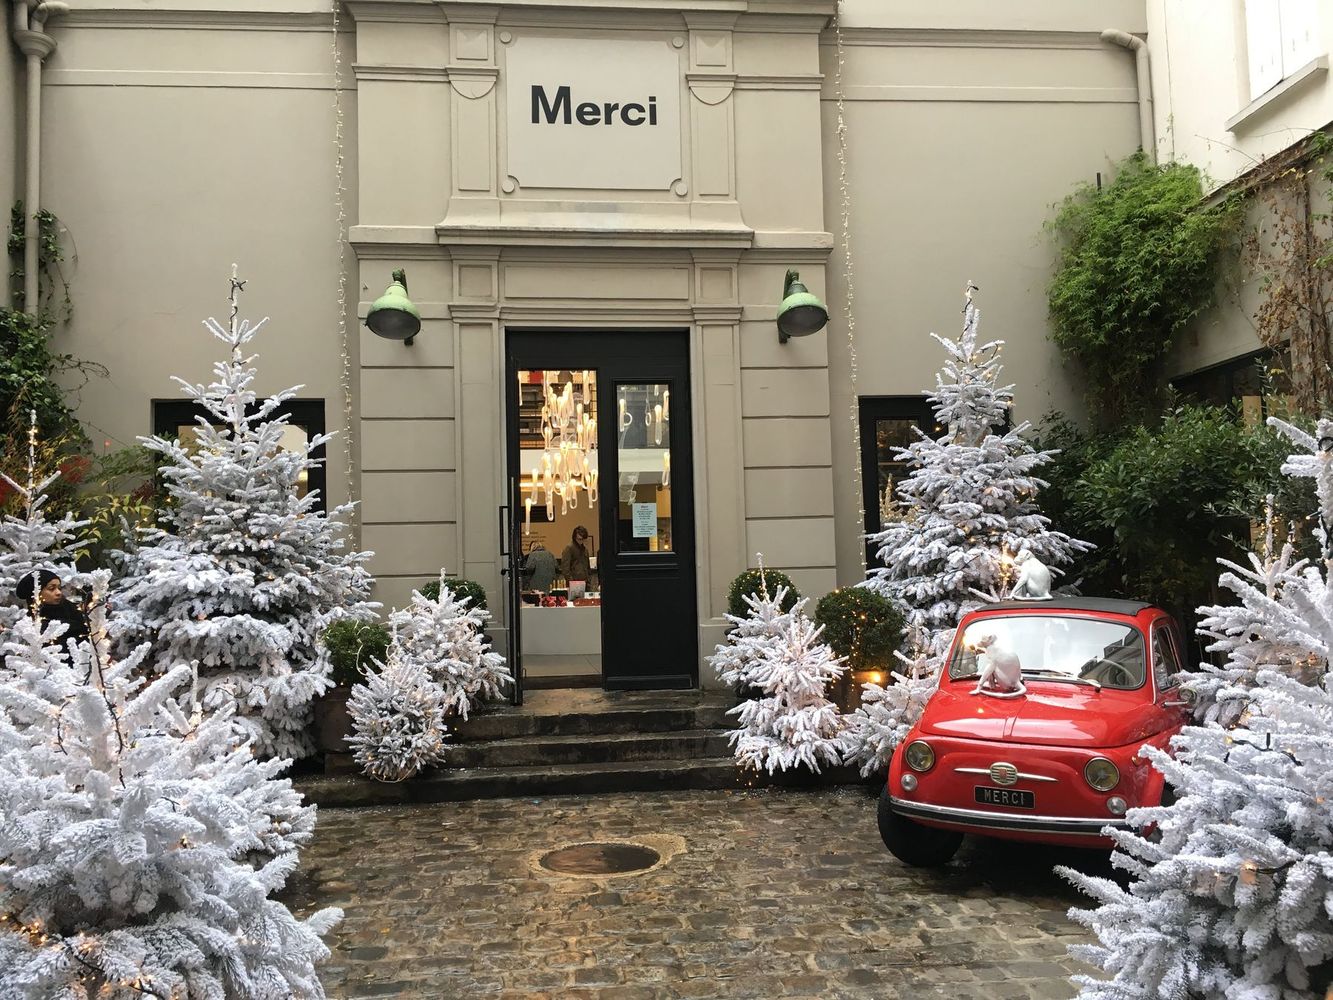 Where To Shop During Winter In Paris - Merci